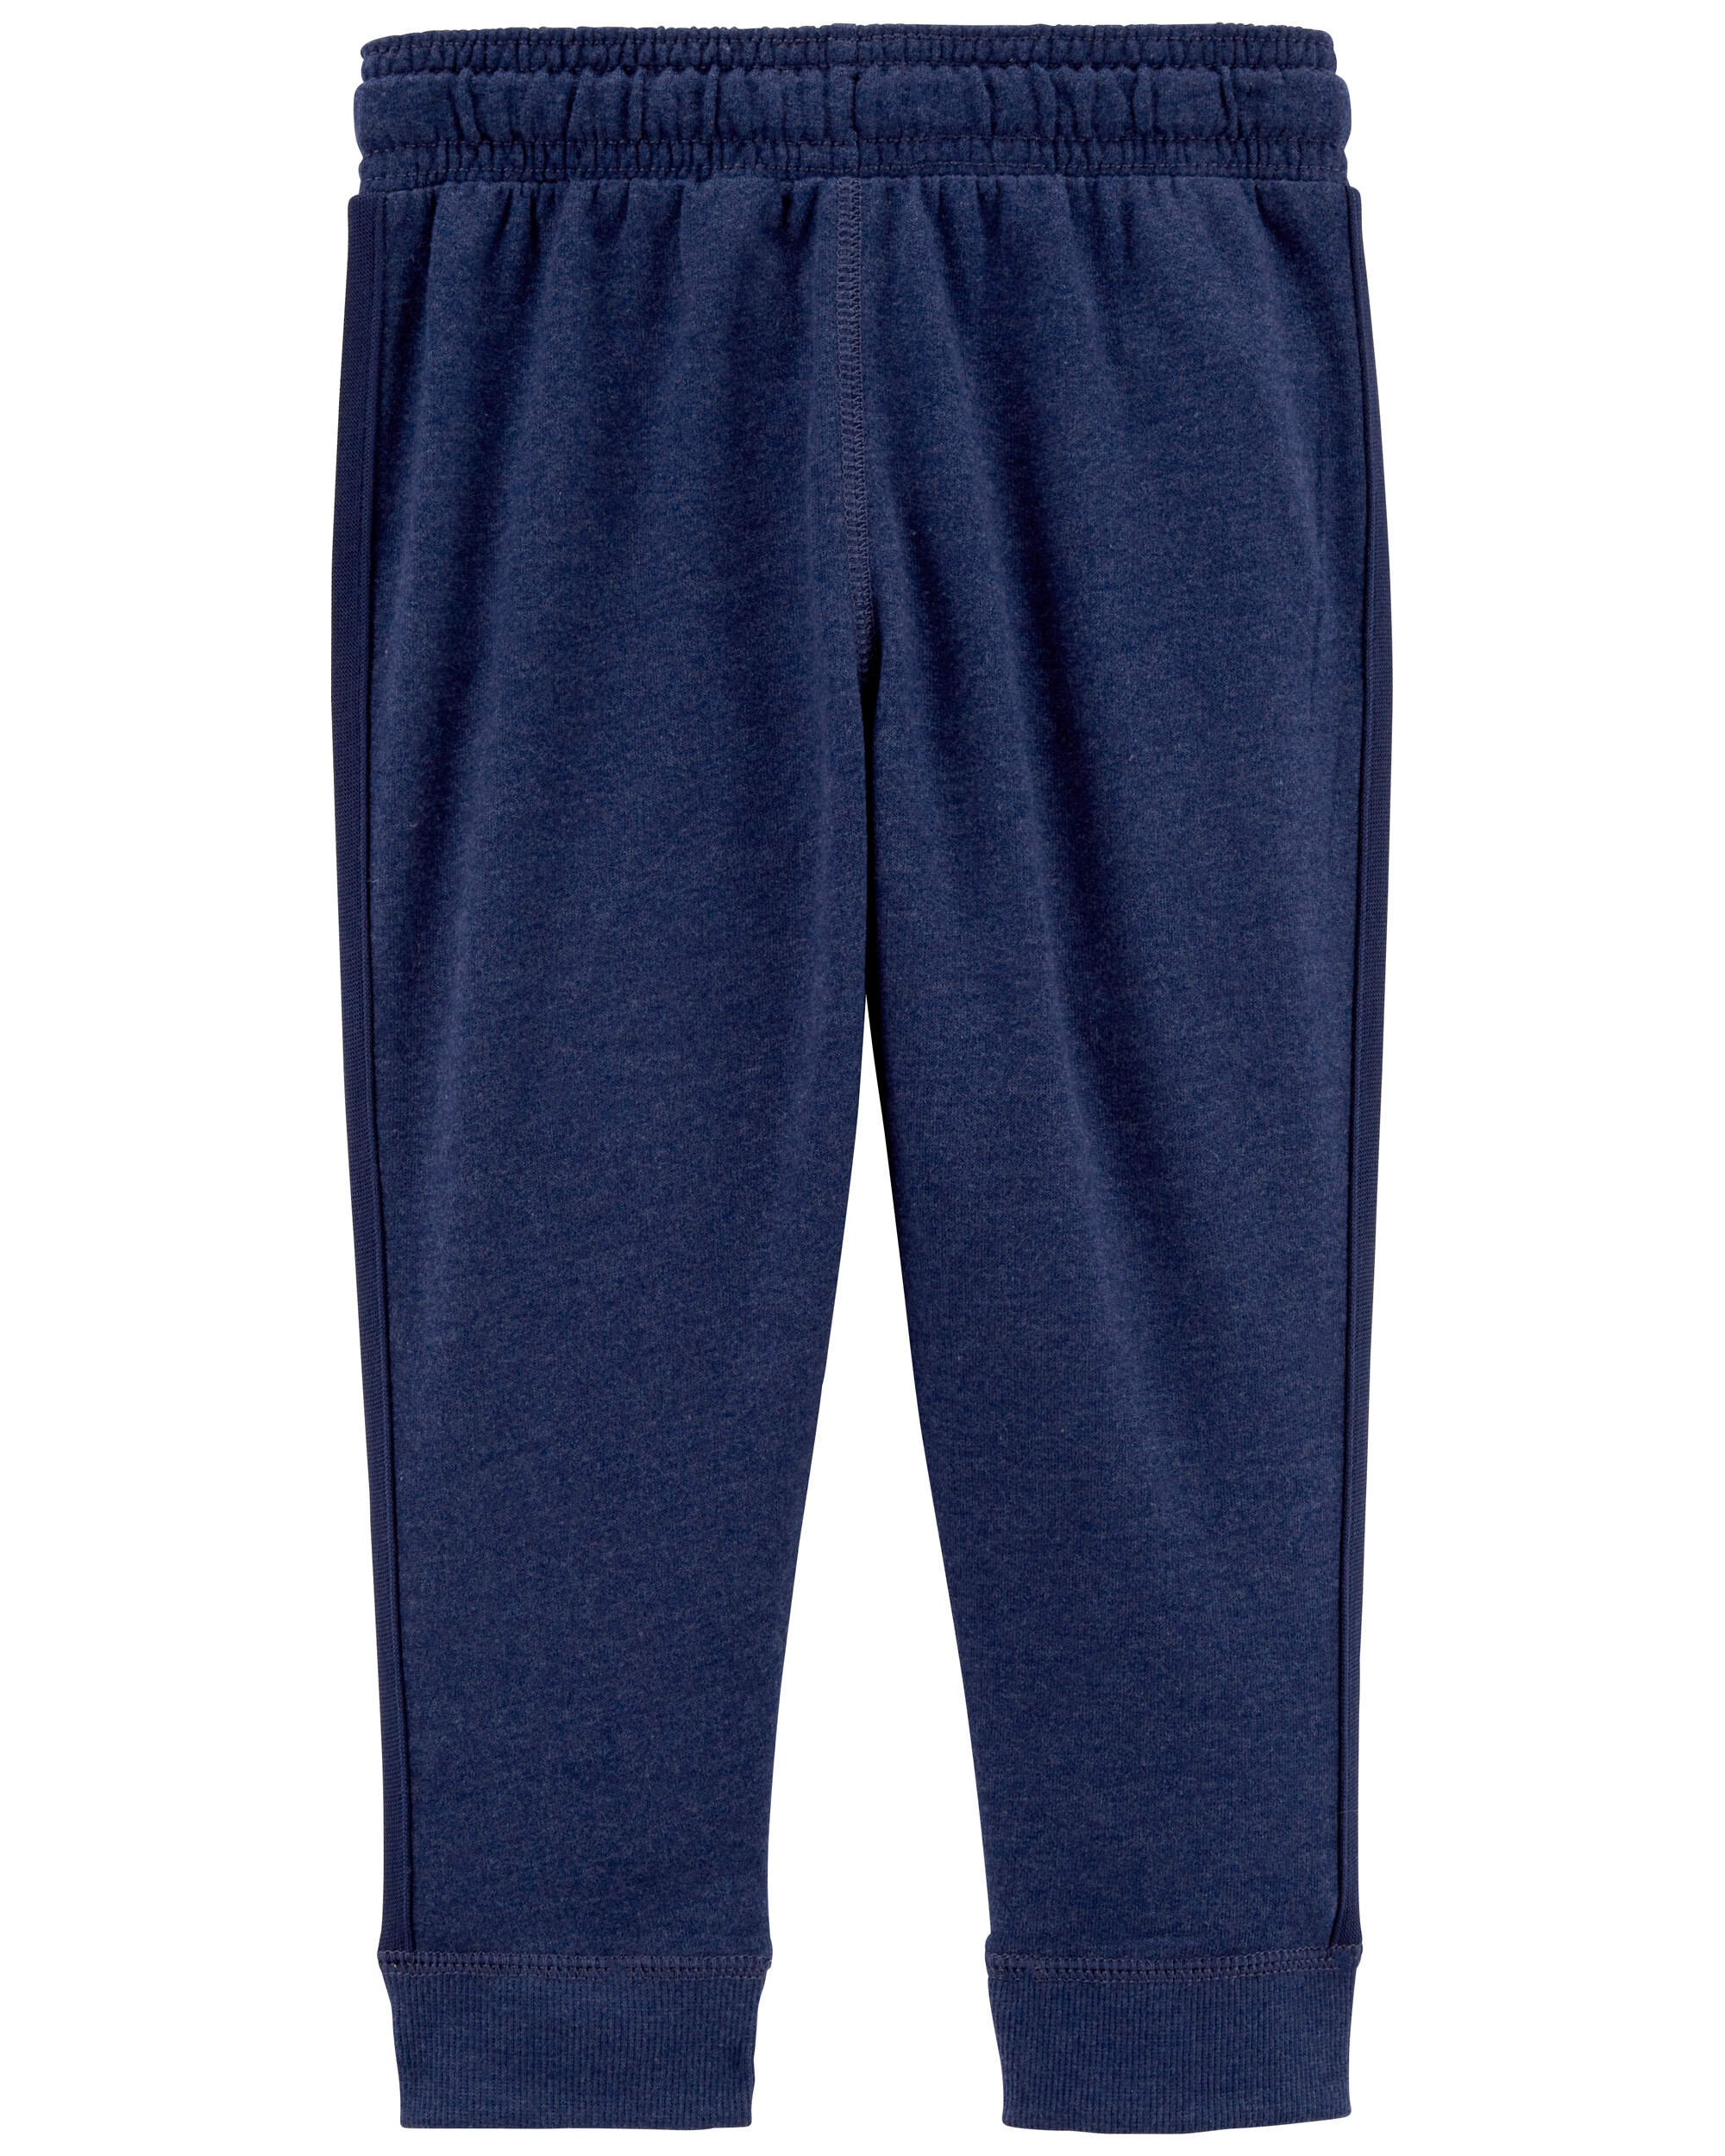 Toddler Pull-On Athletic Pants